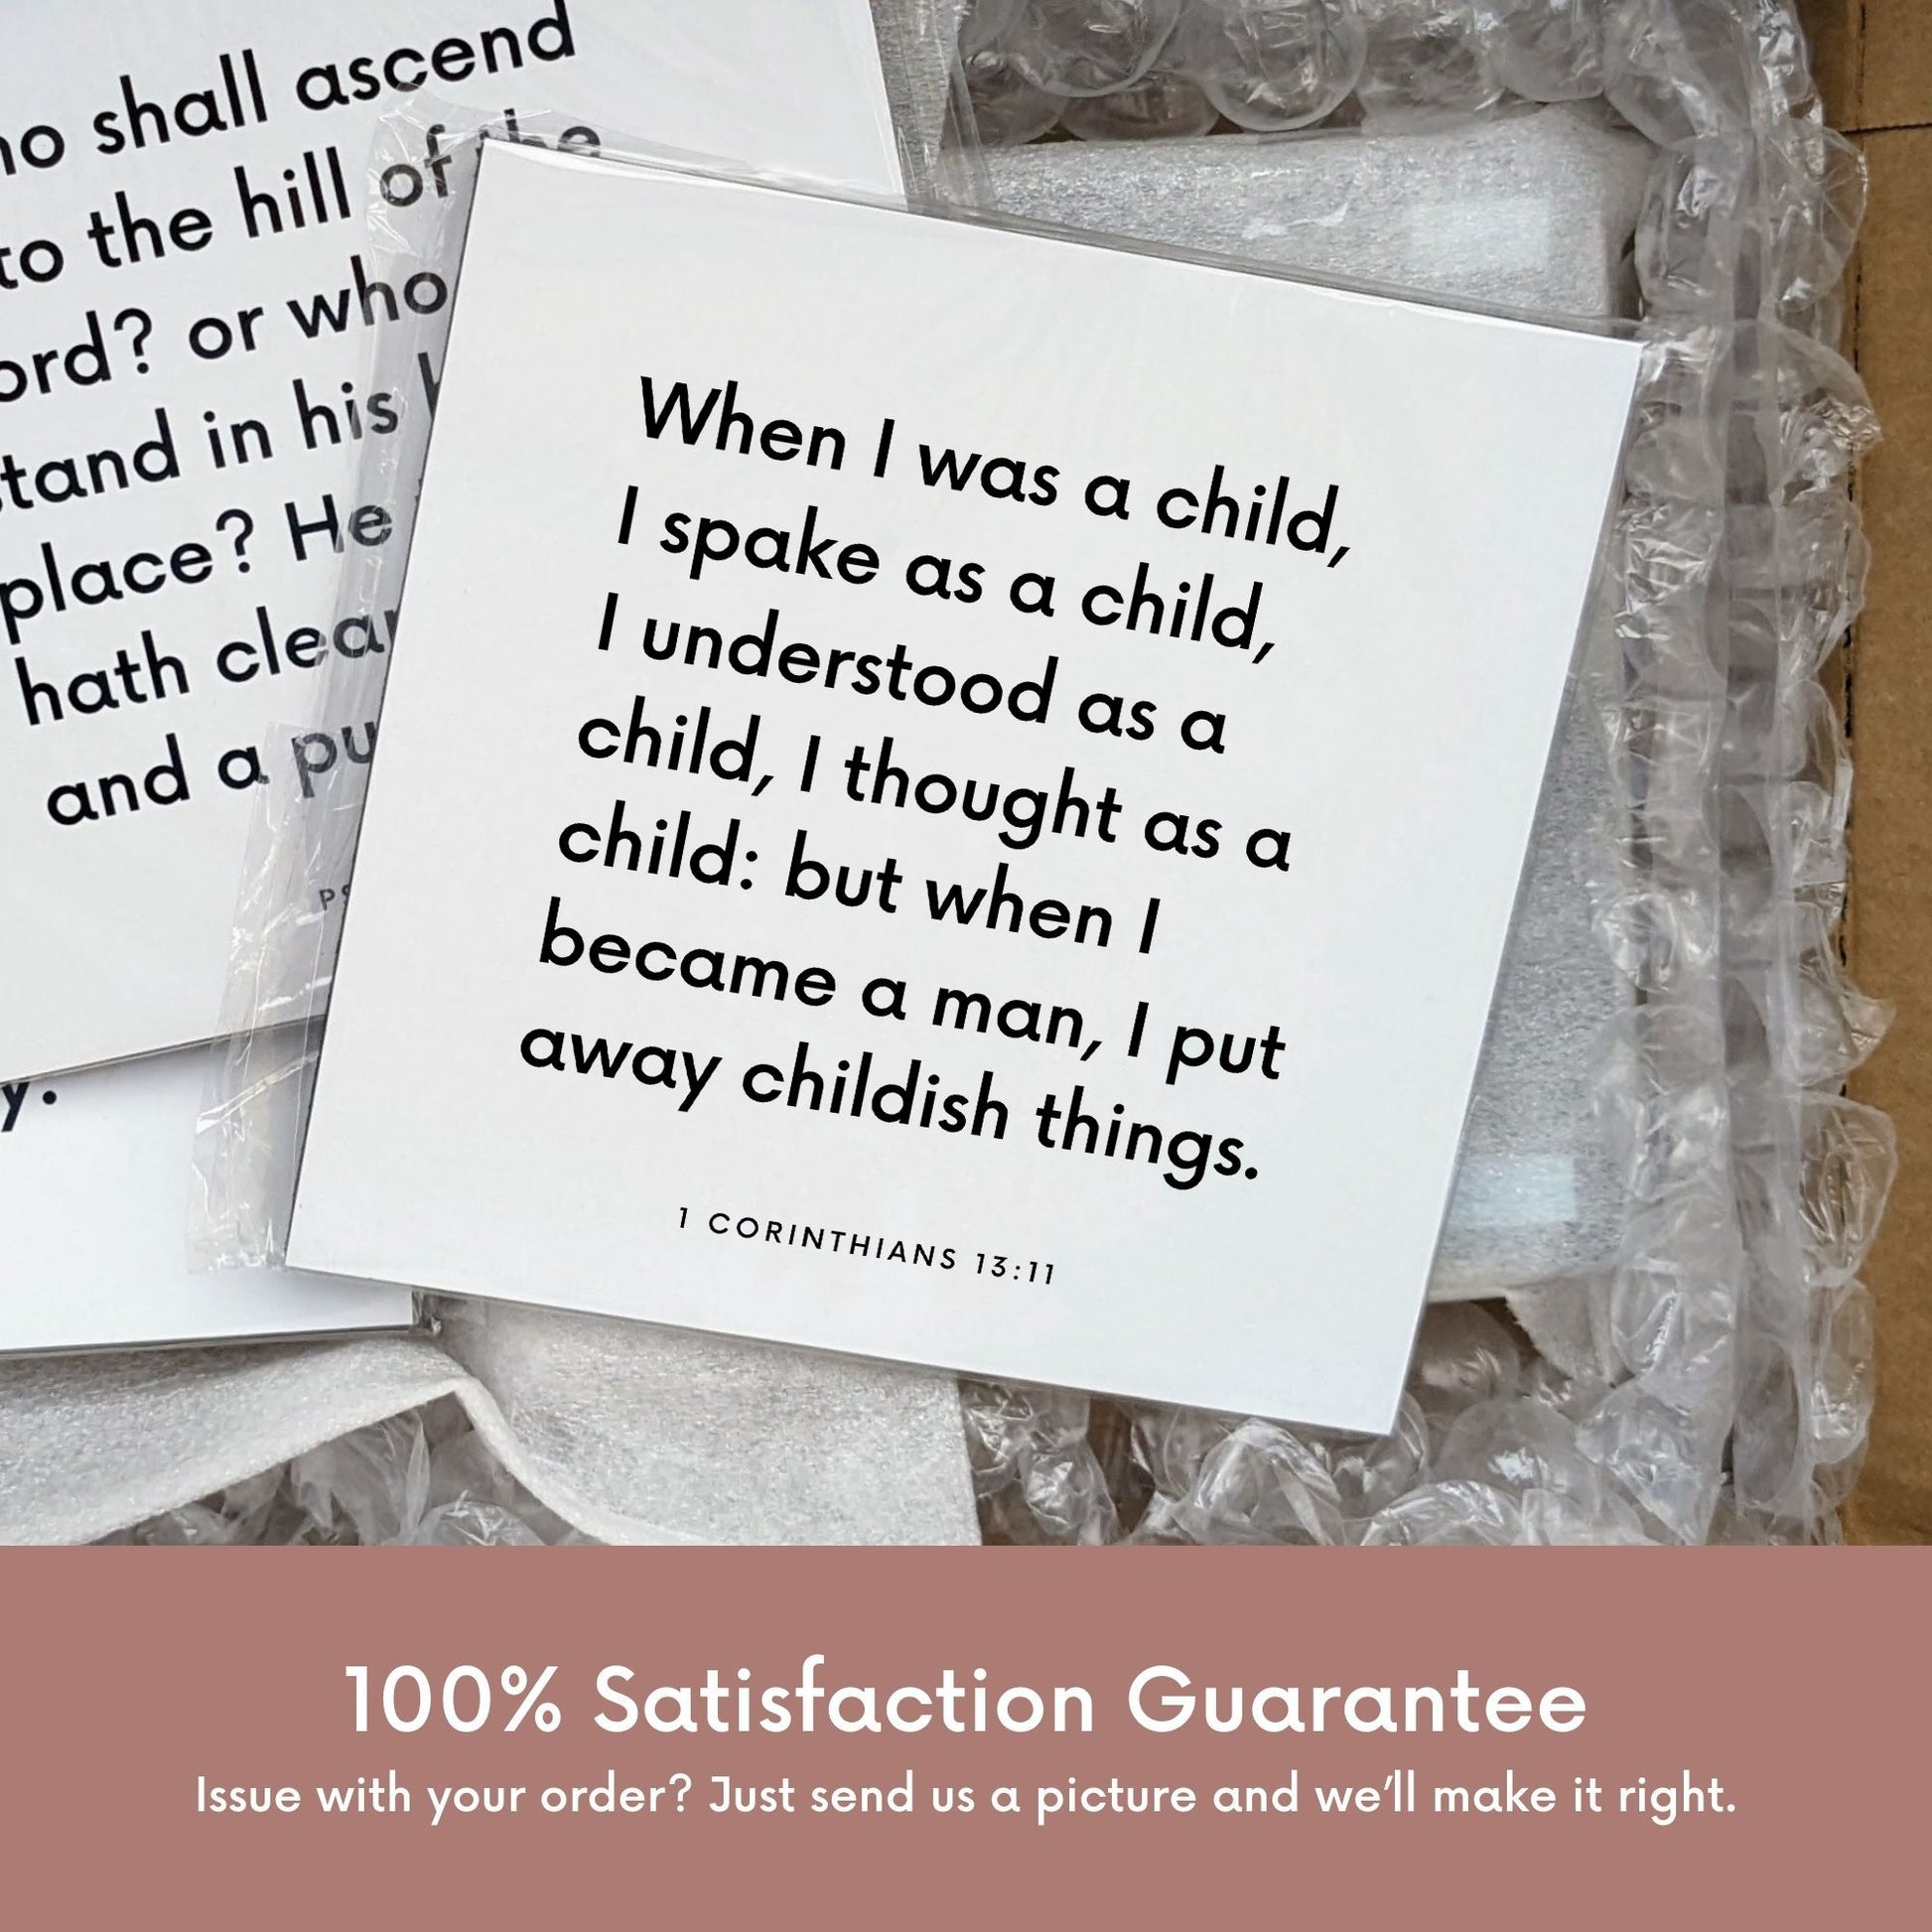 Shipping materials for scripture tile of 1 Corinthians 13:11 - "When I was a child, I spake as a child"